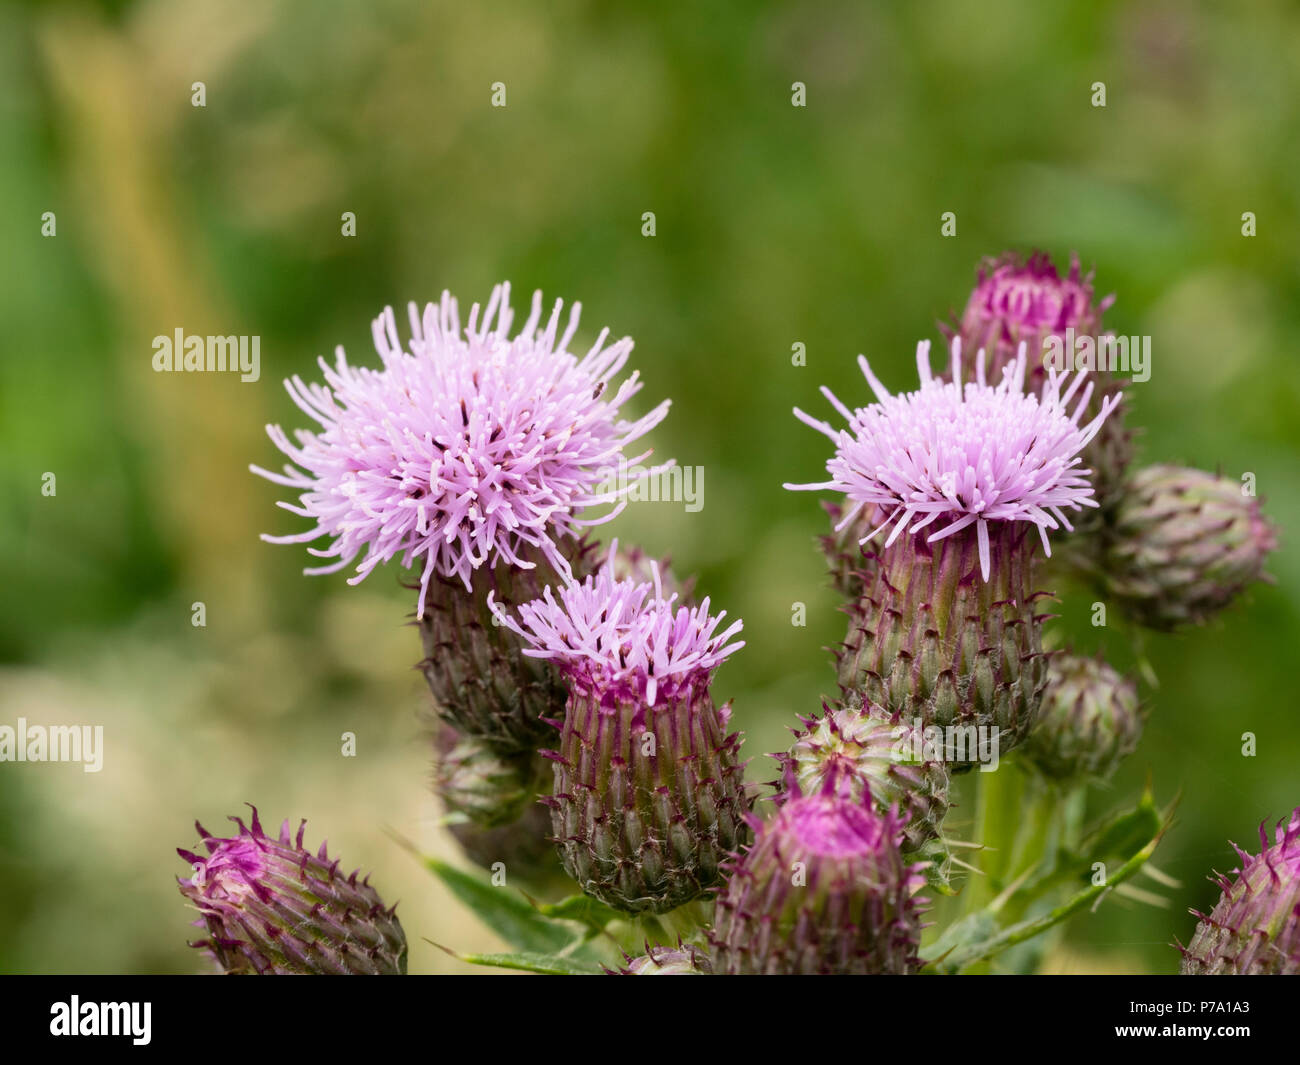 Pink summer flower heads of the creeping thistle, Cirsium arvense, an UK wildflower Stock Photo